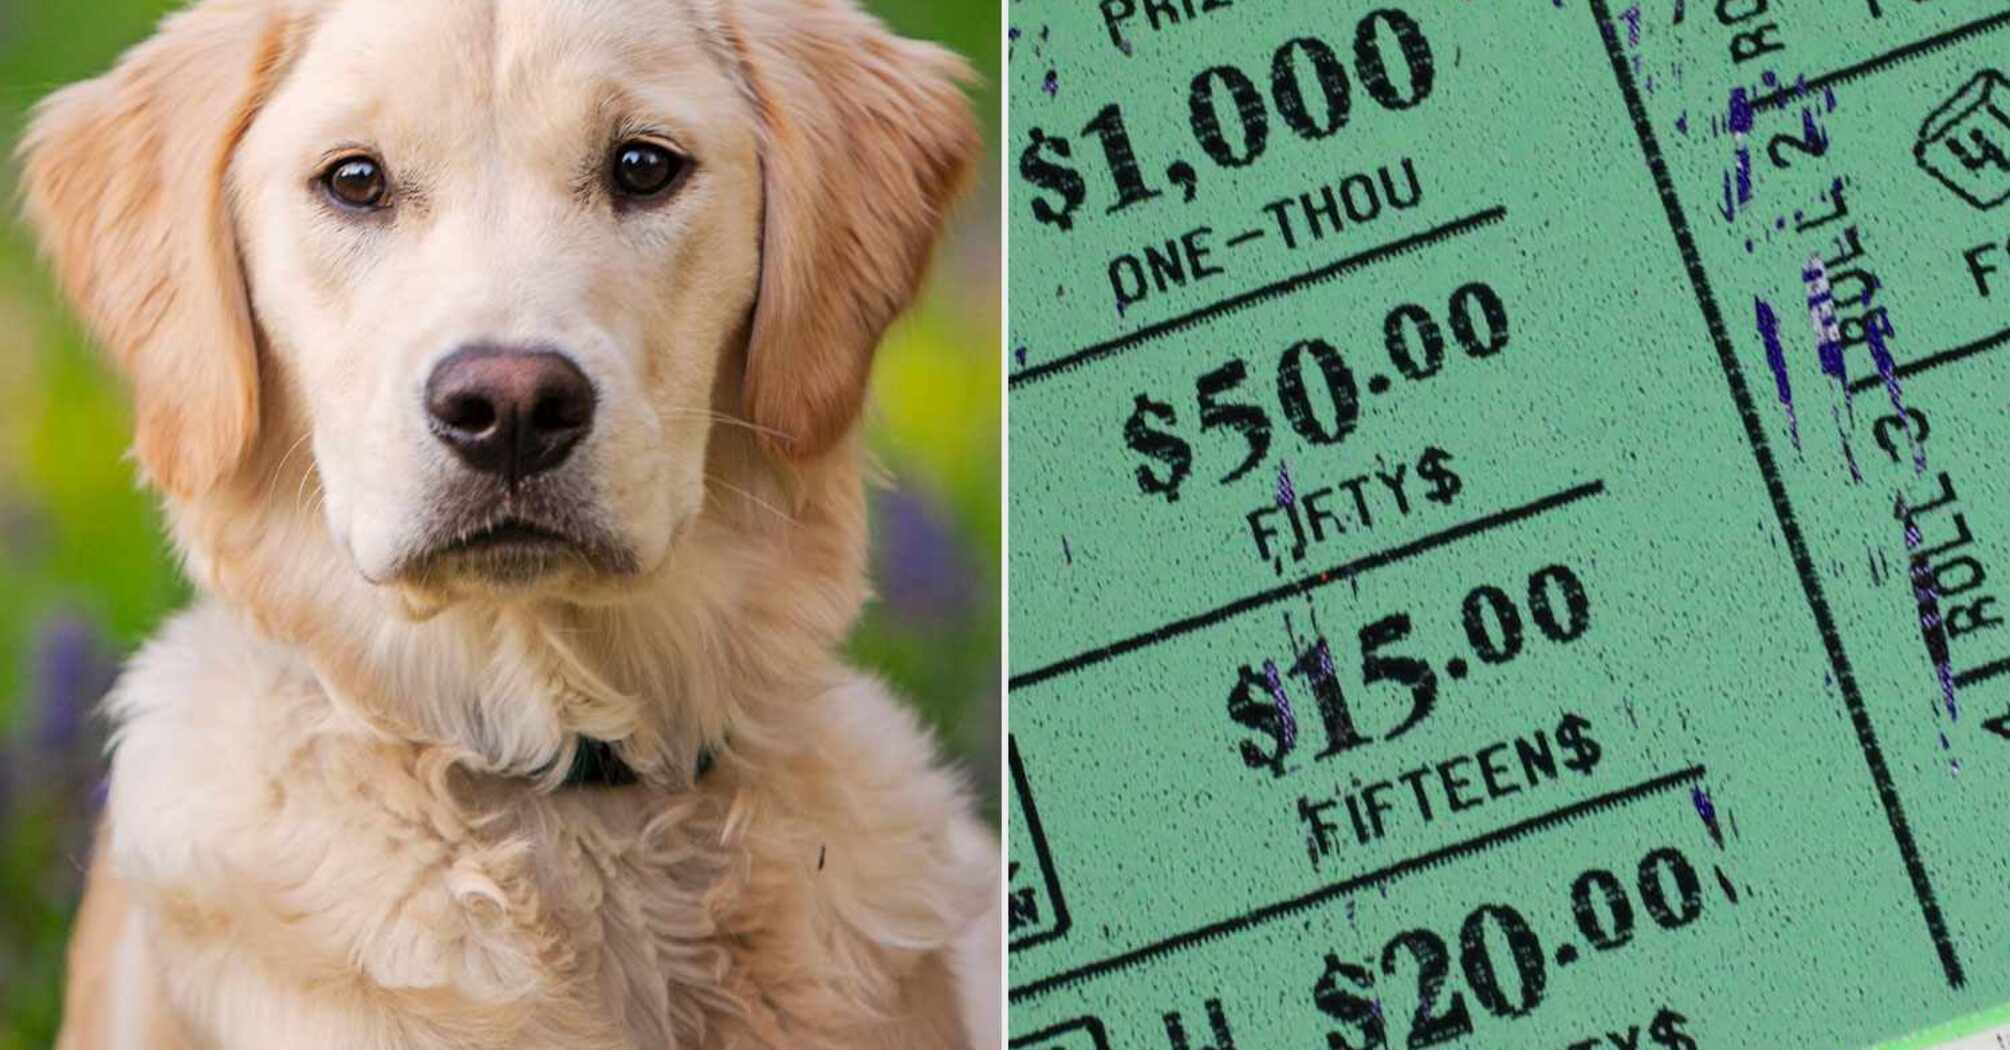 A dog ran into a store and stole a winning lottery ticket